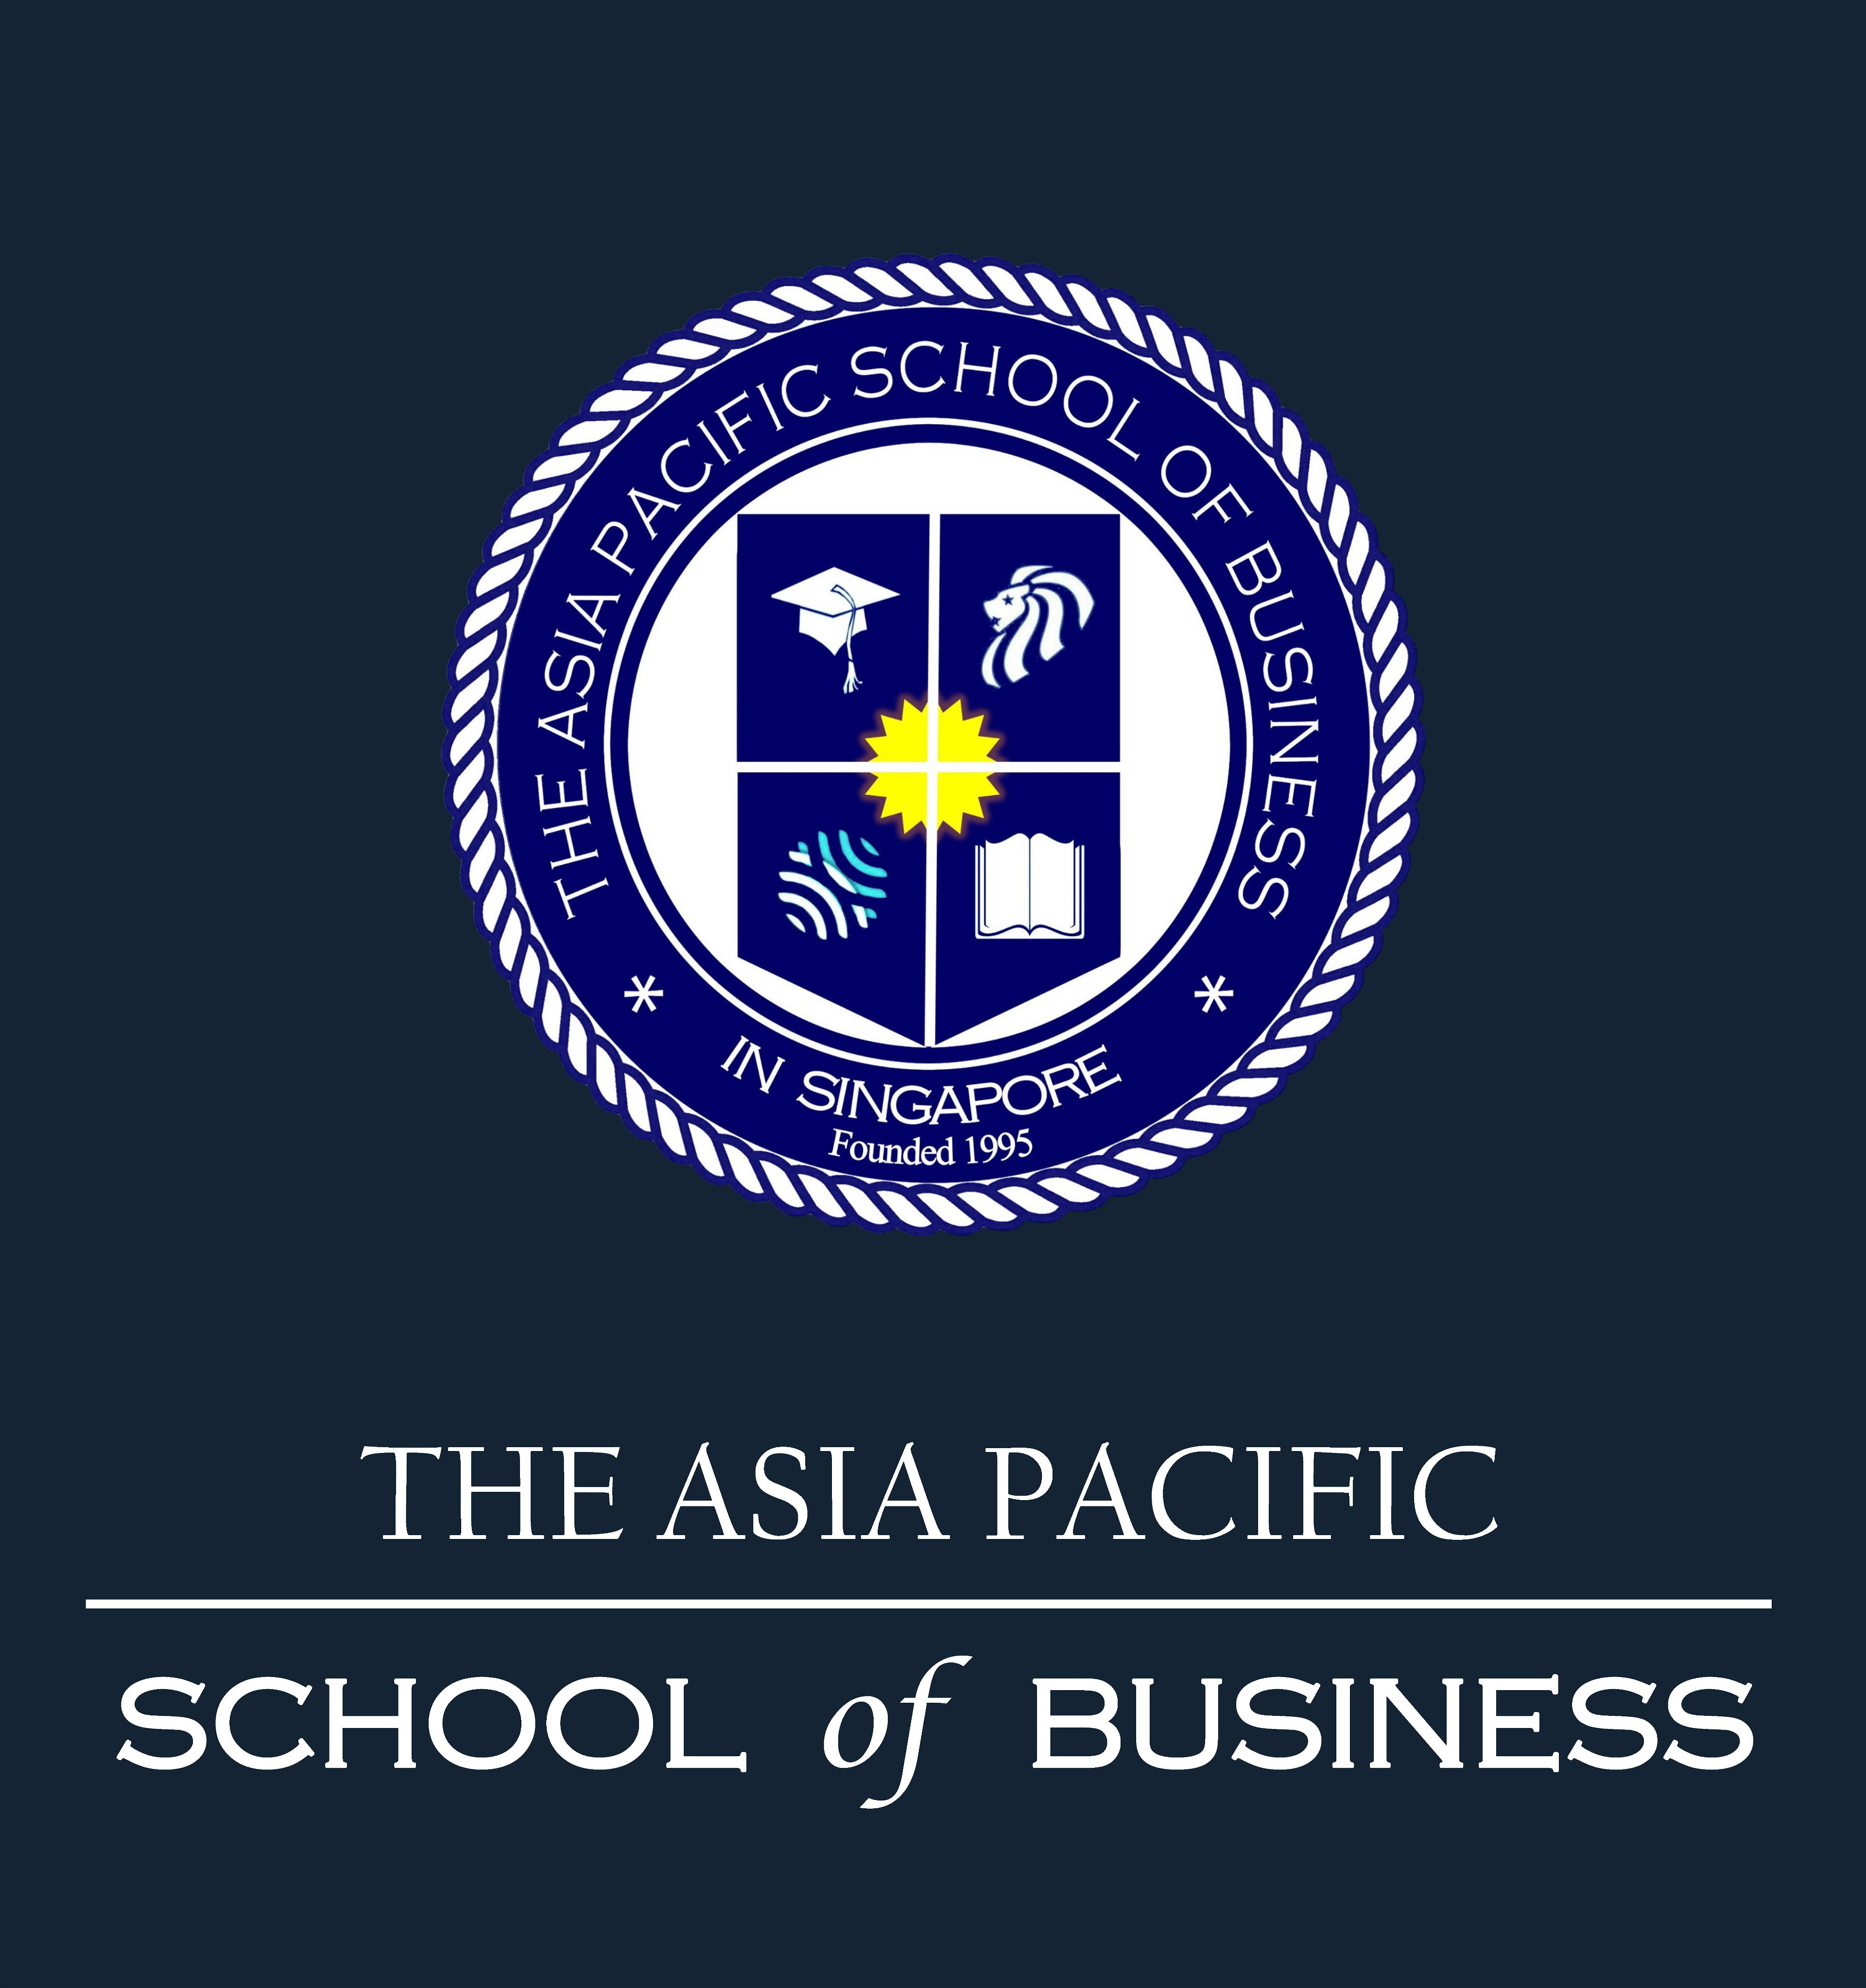 The Asia Pacific School of Business logo